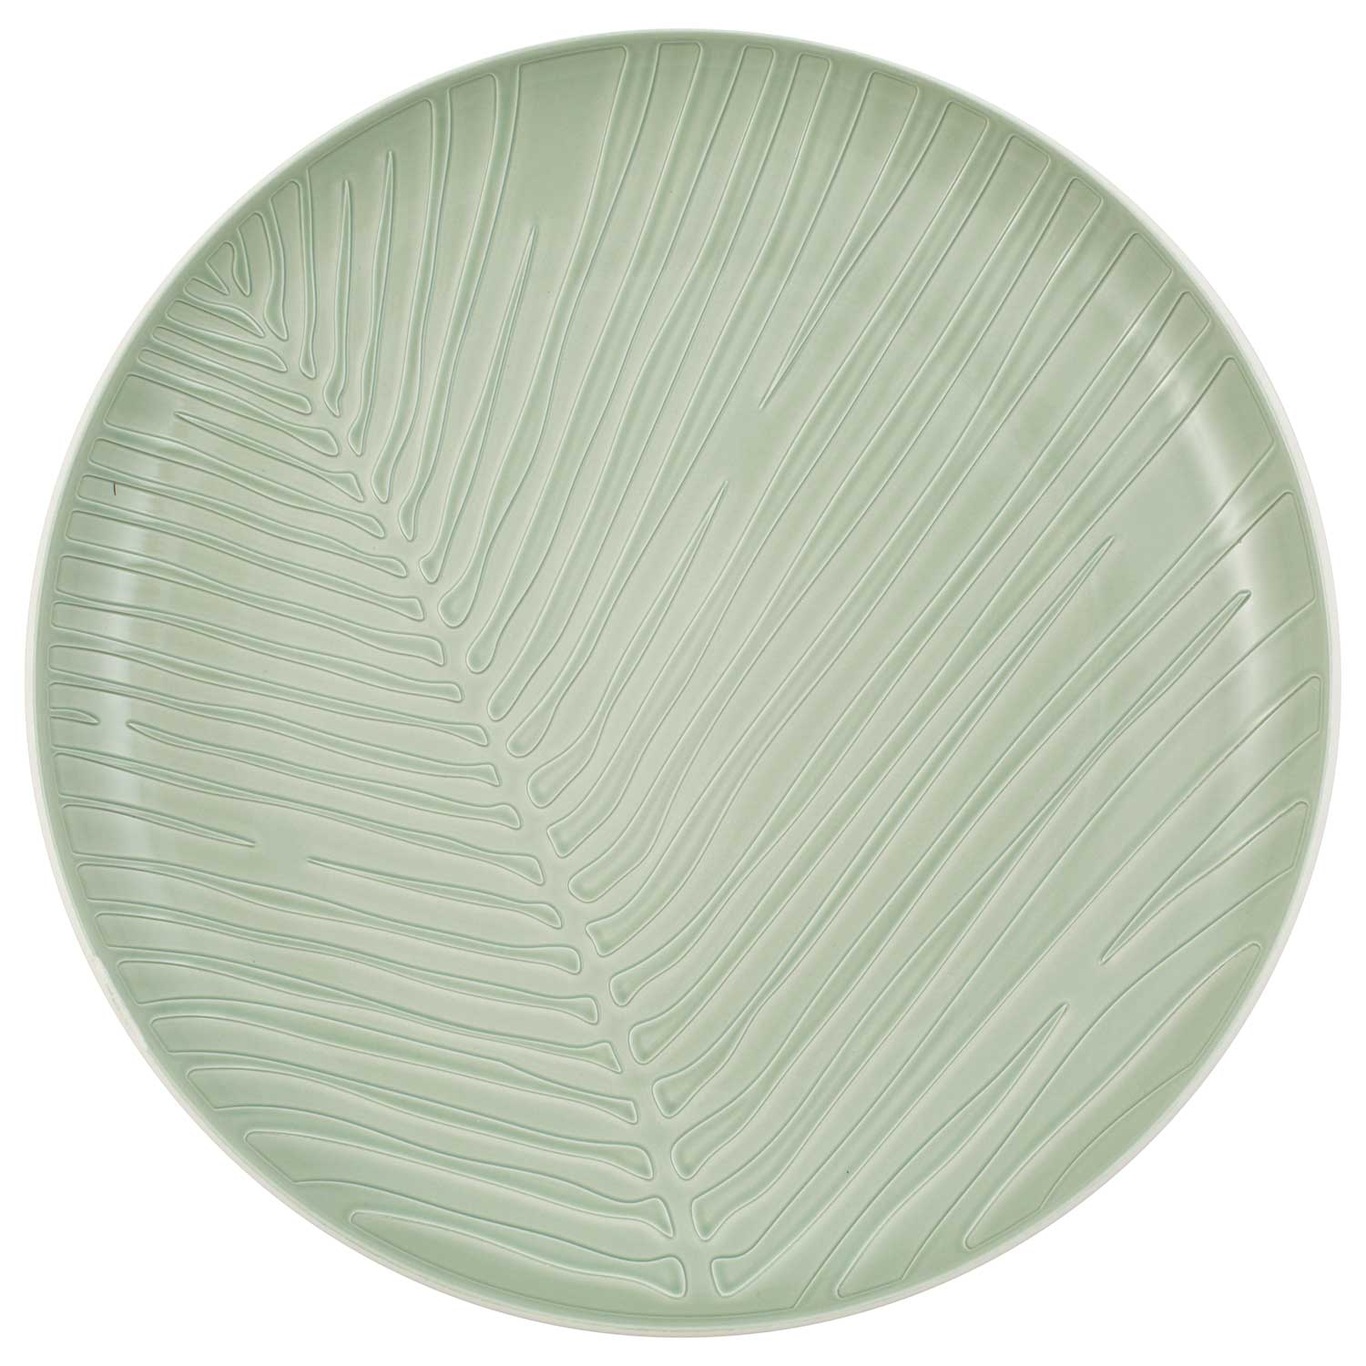 It's My Match Plate Leaf 24 cm, Mineral Green